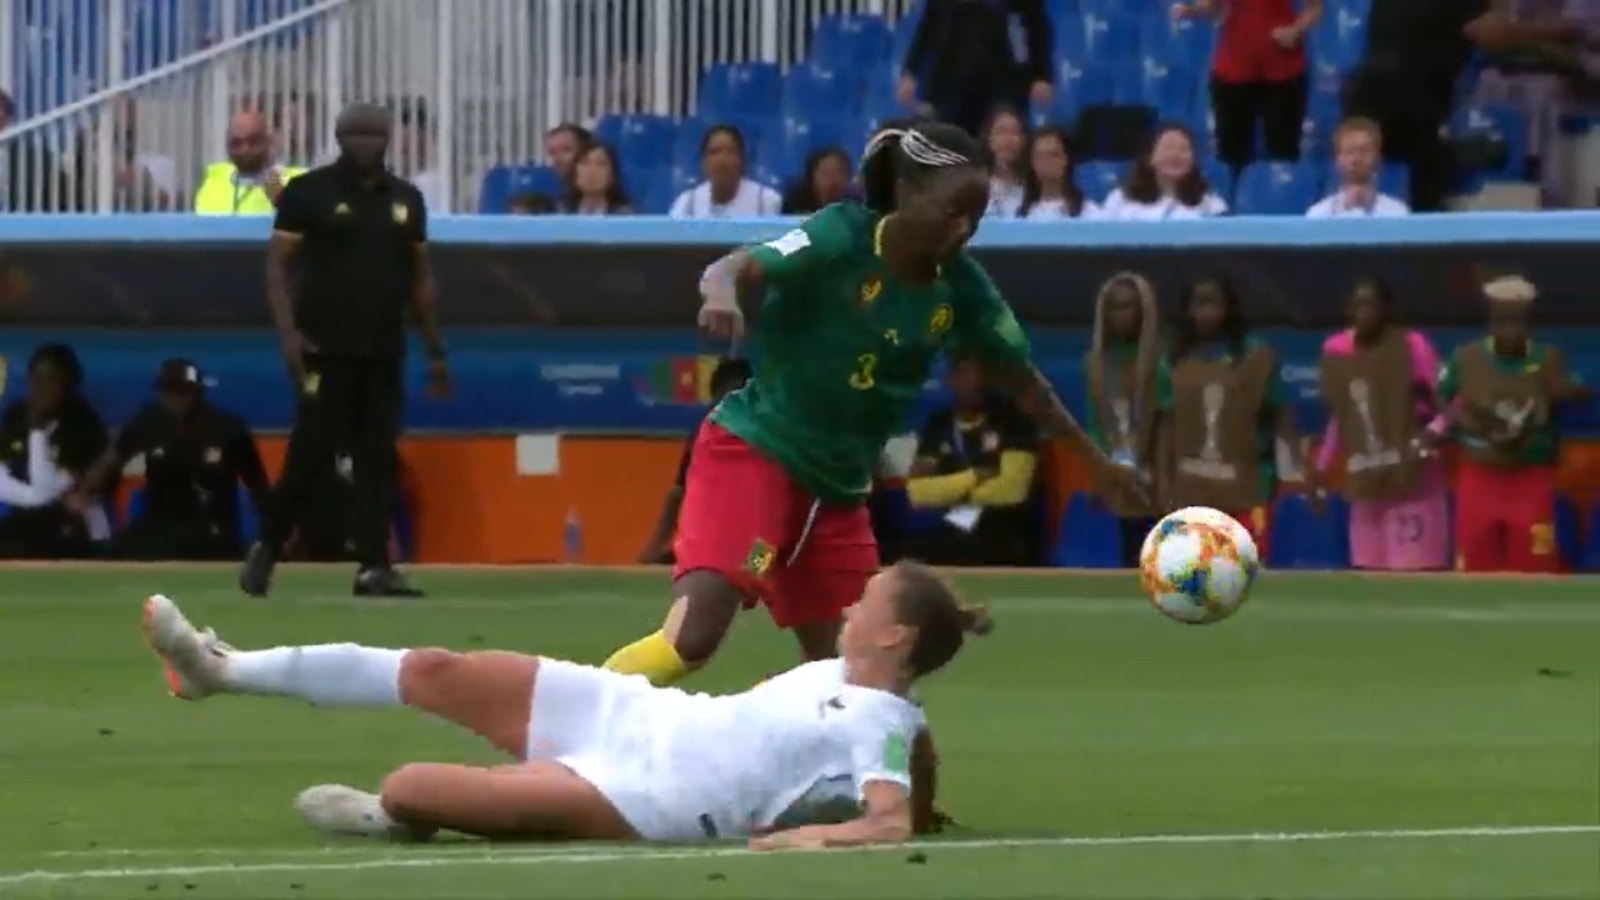 Cameroon shocks Ferns: Number 50 |  The most memorable moments in the history of the Women's World Cup